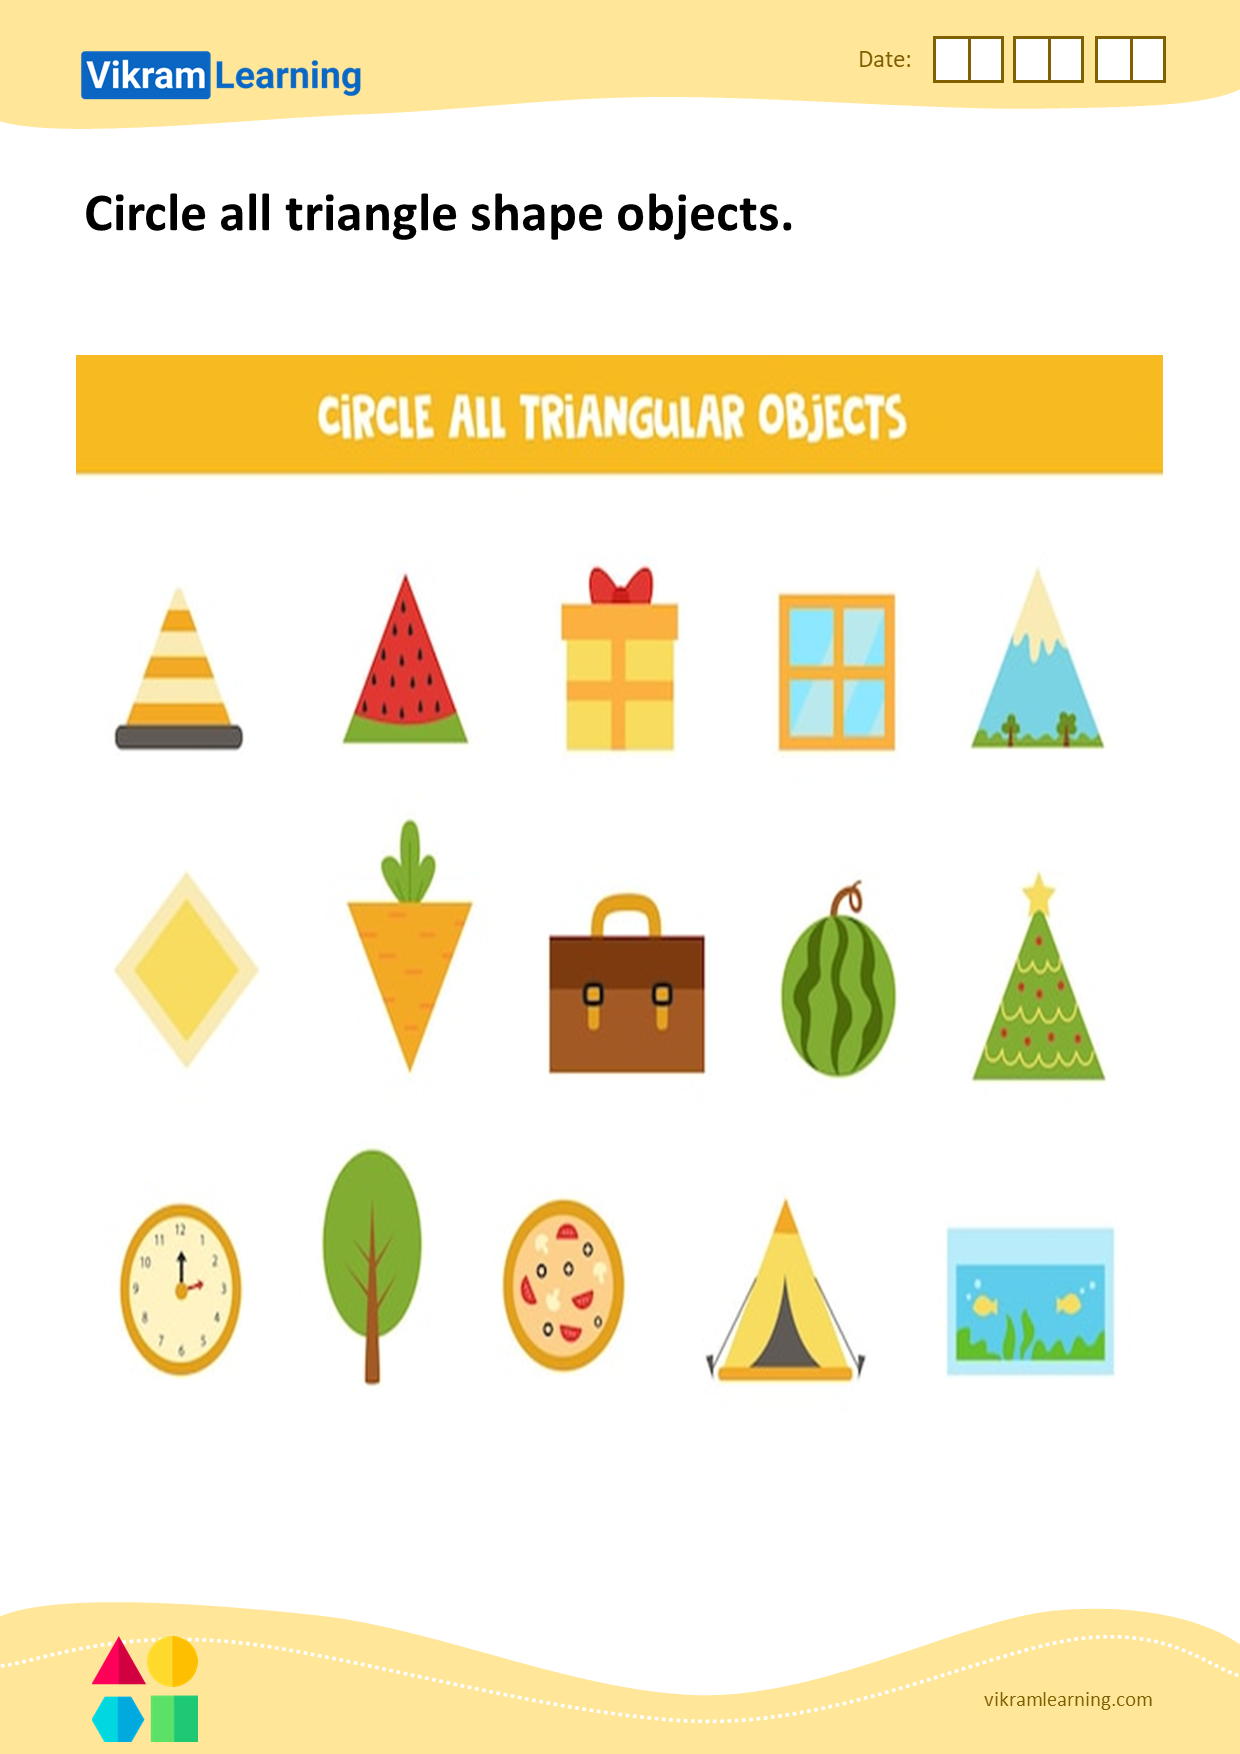 Download circle all triangle shape objects worksheets | vikramlearning.com